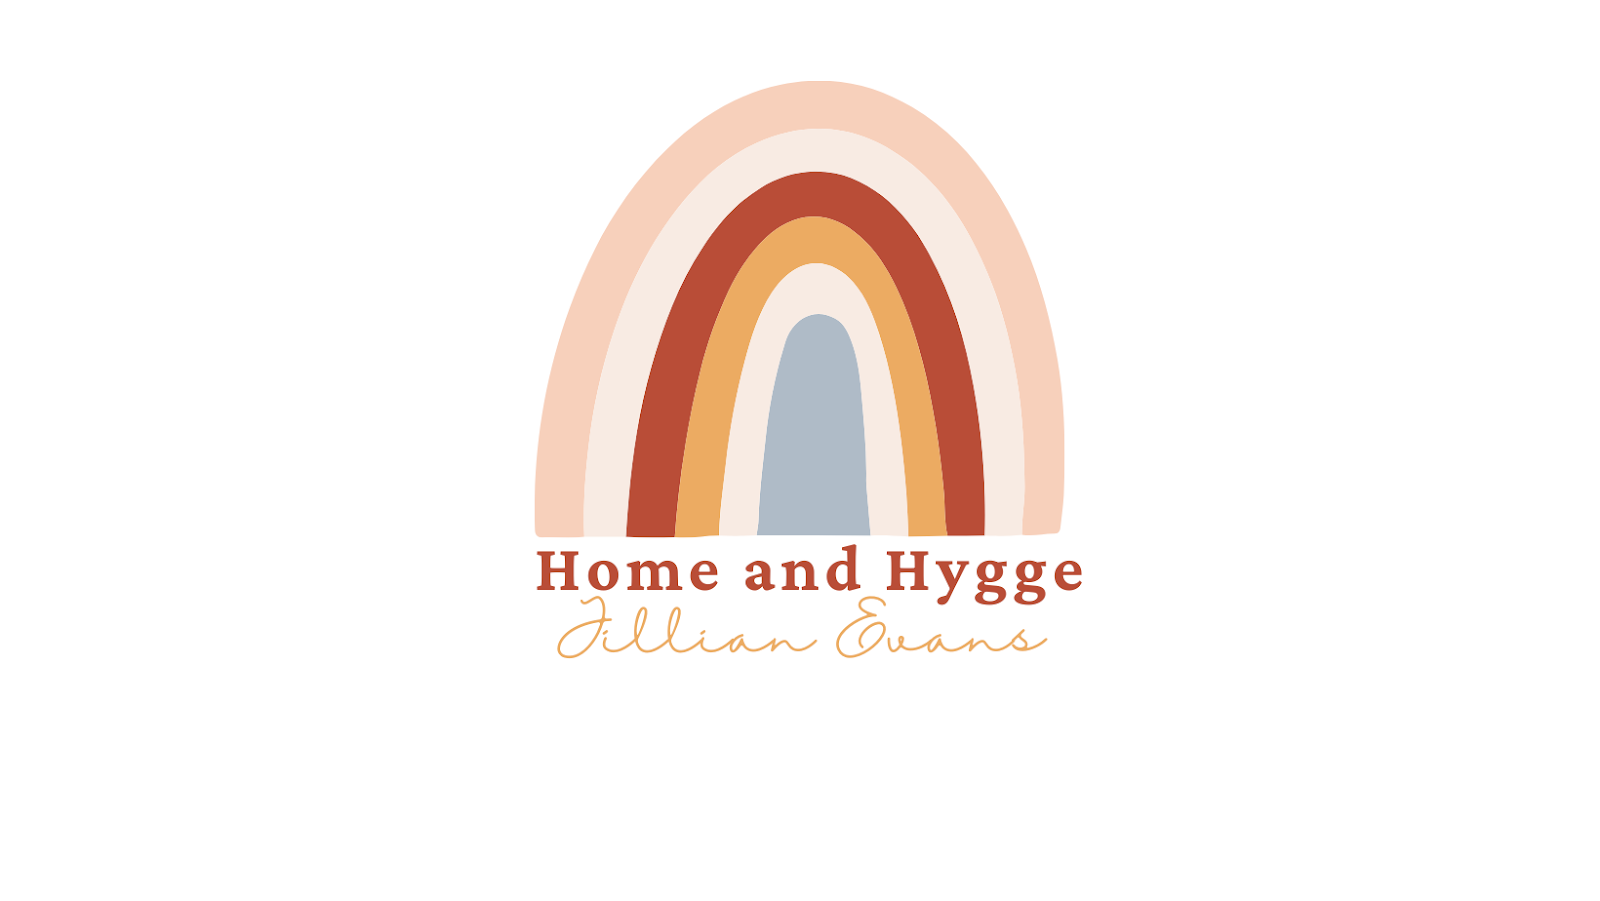 Home and Hygge